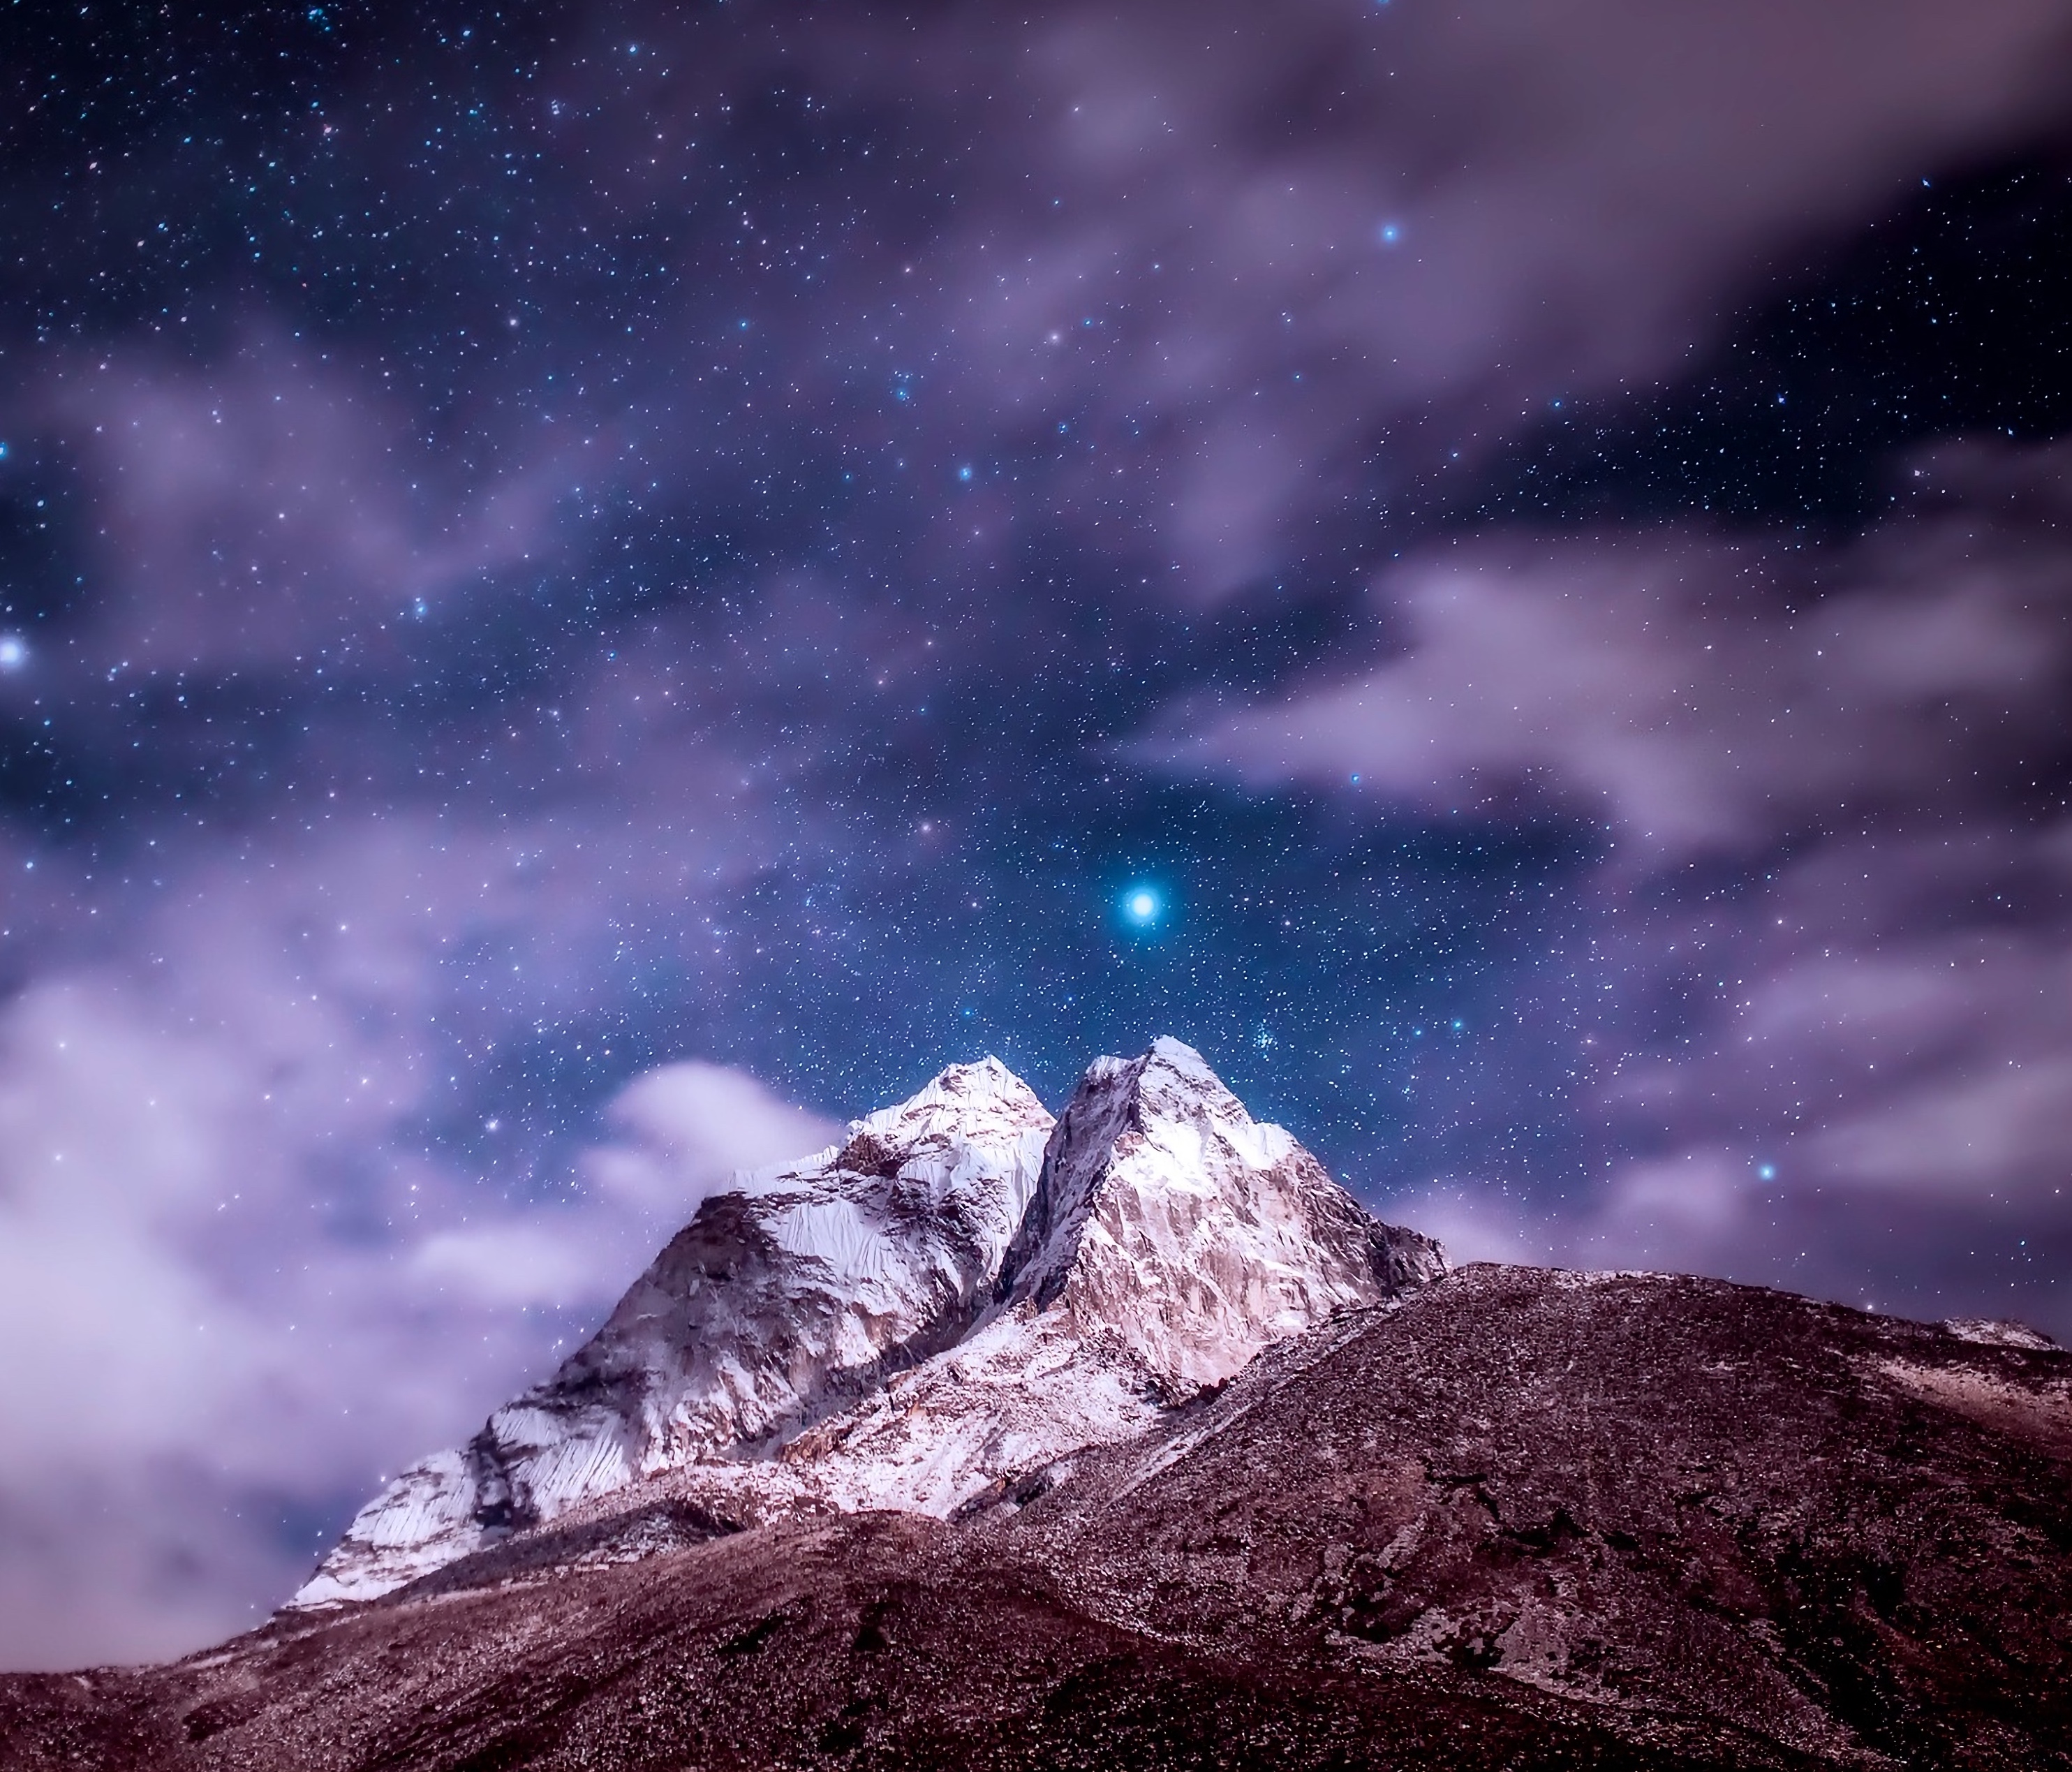 himalayas, starry sky, mountains, nature, clouds, vertex, top, snow covered, snowbound cellphone